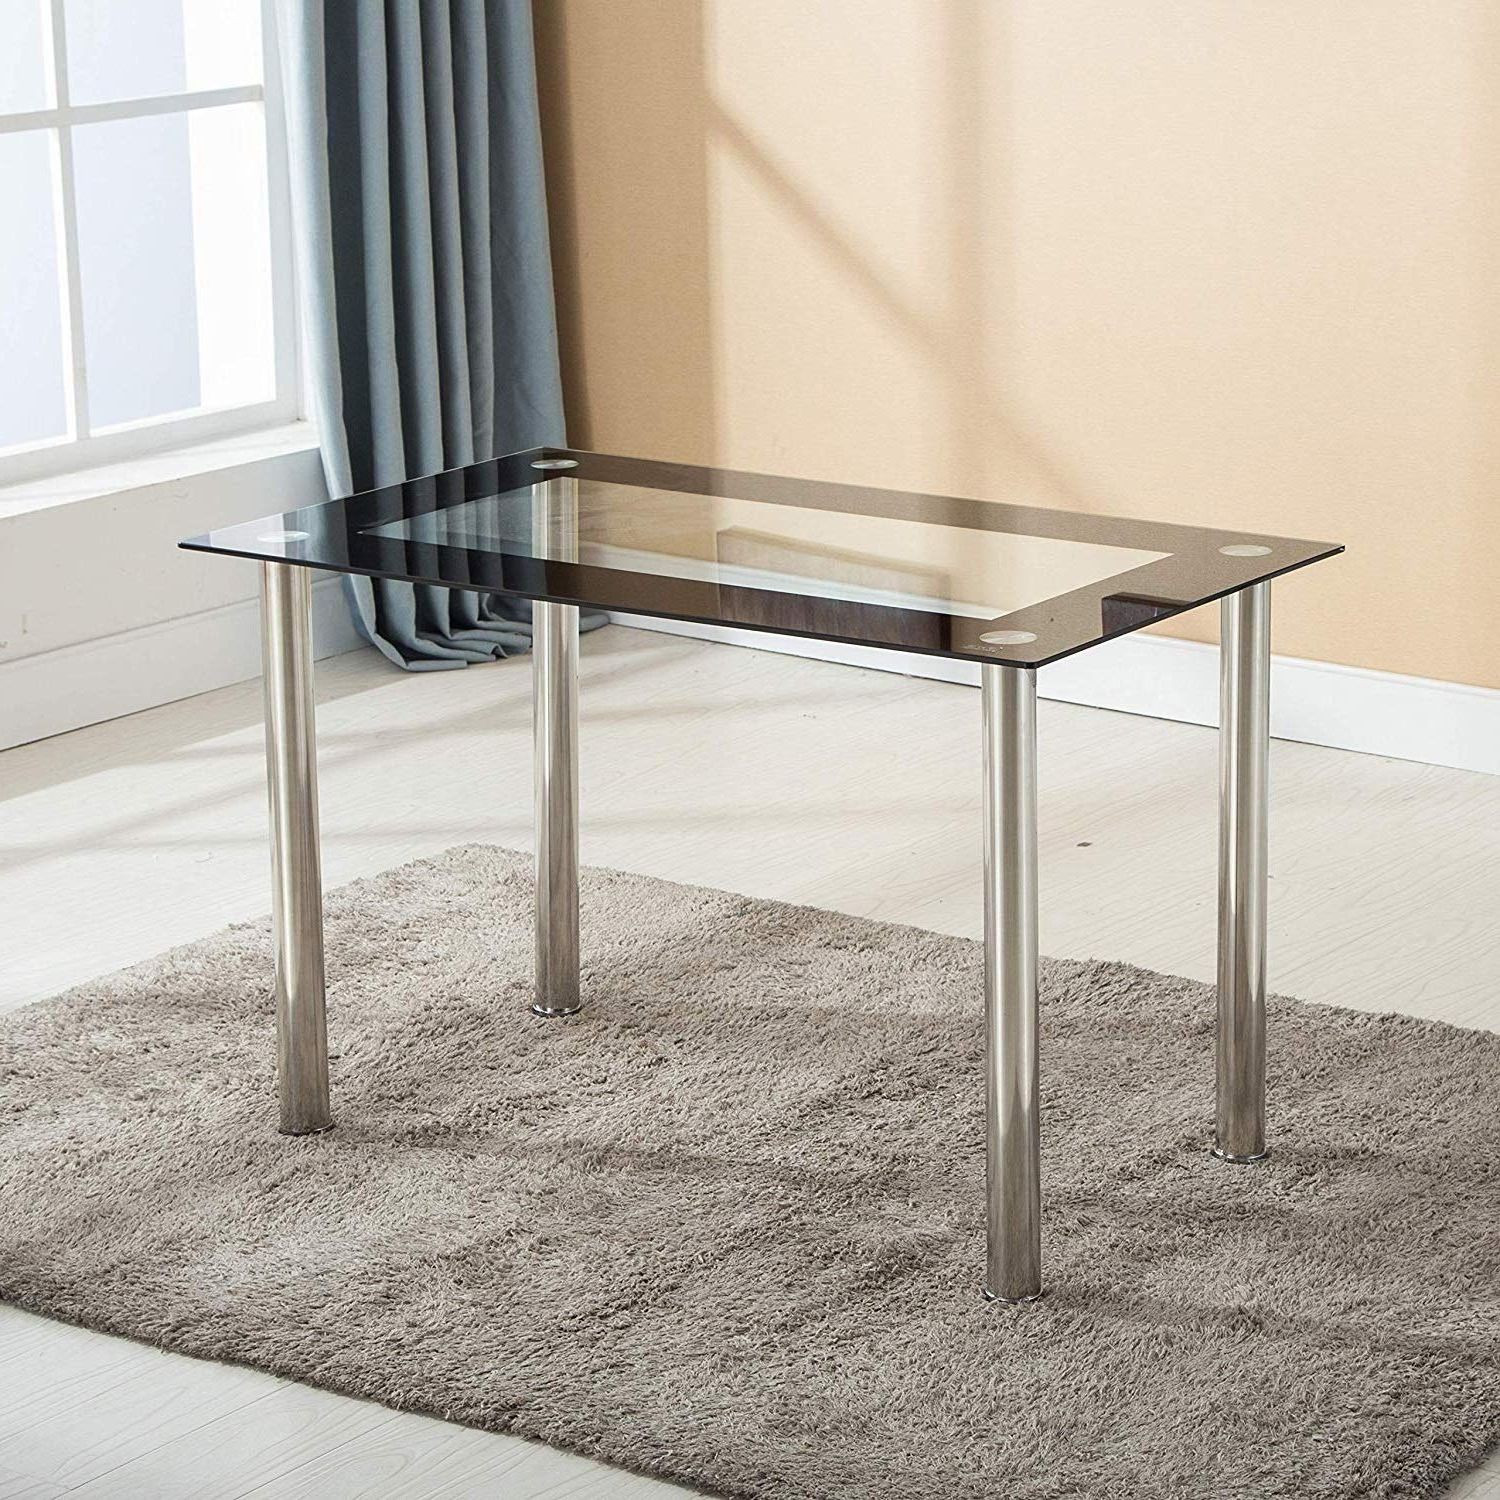 Most Recent Mecor Modern Dining Table With Glass Top, Leisure Rectangualr Kitchen Table  Metal Legs 47in For 4/6 Persons Rectangular (black) Inside Rectangular Glasstop Dining Tables (View 21 of 30)